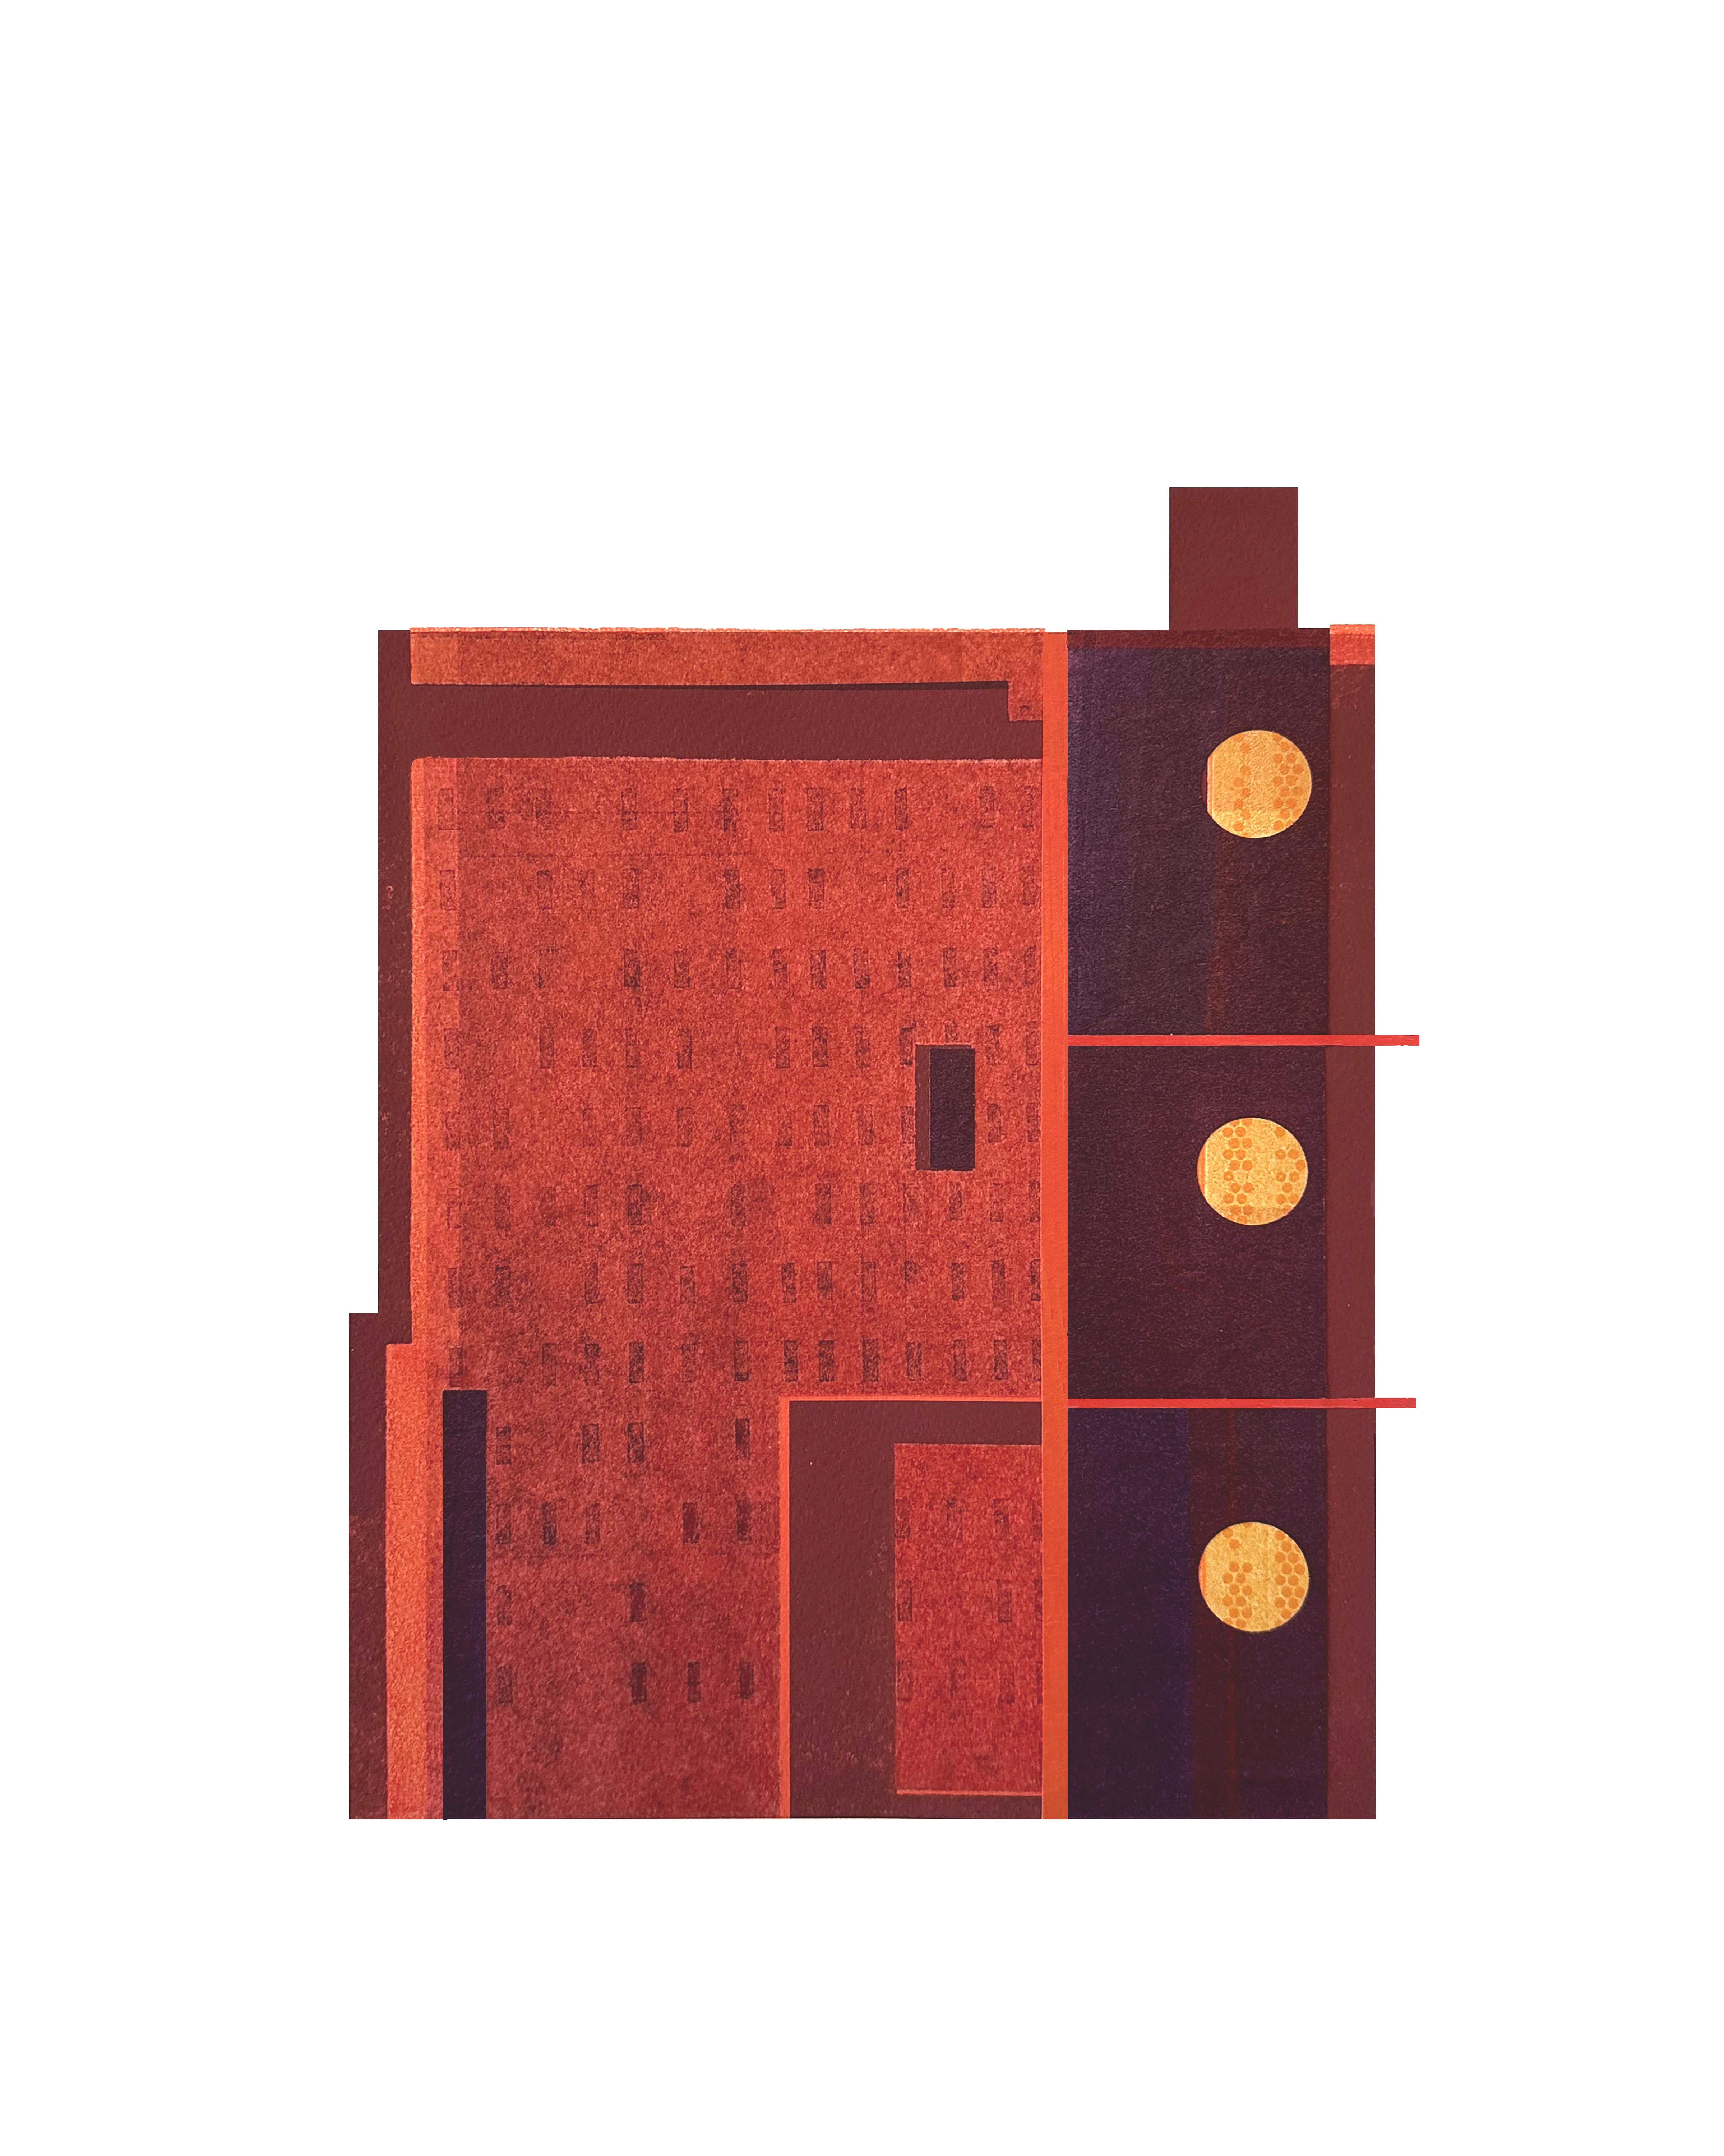 Agathe Bouton Abstract Print - Building VI: modernist city architecture collage on monoprint in red, unframed